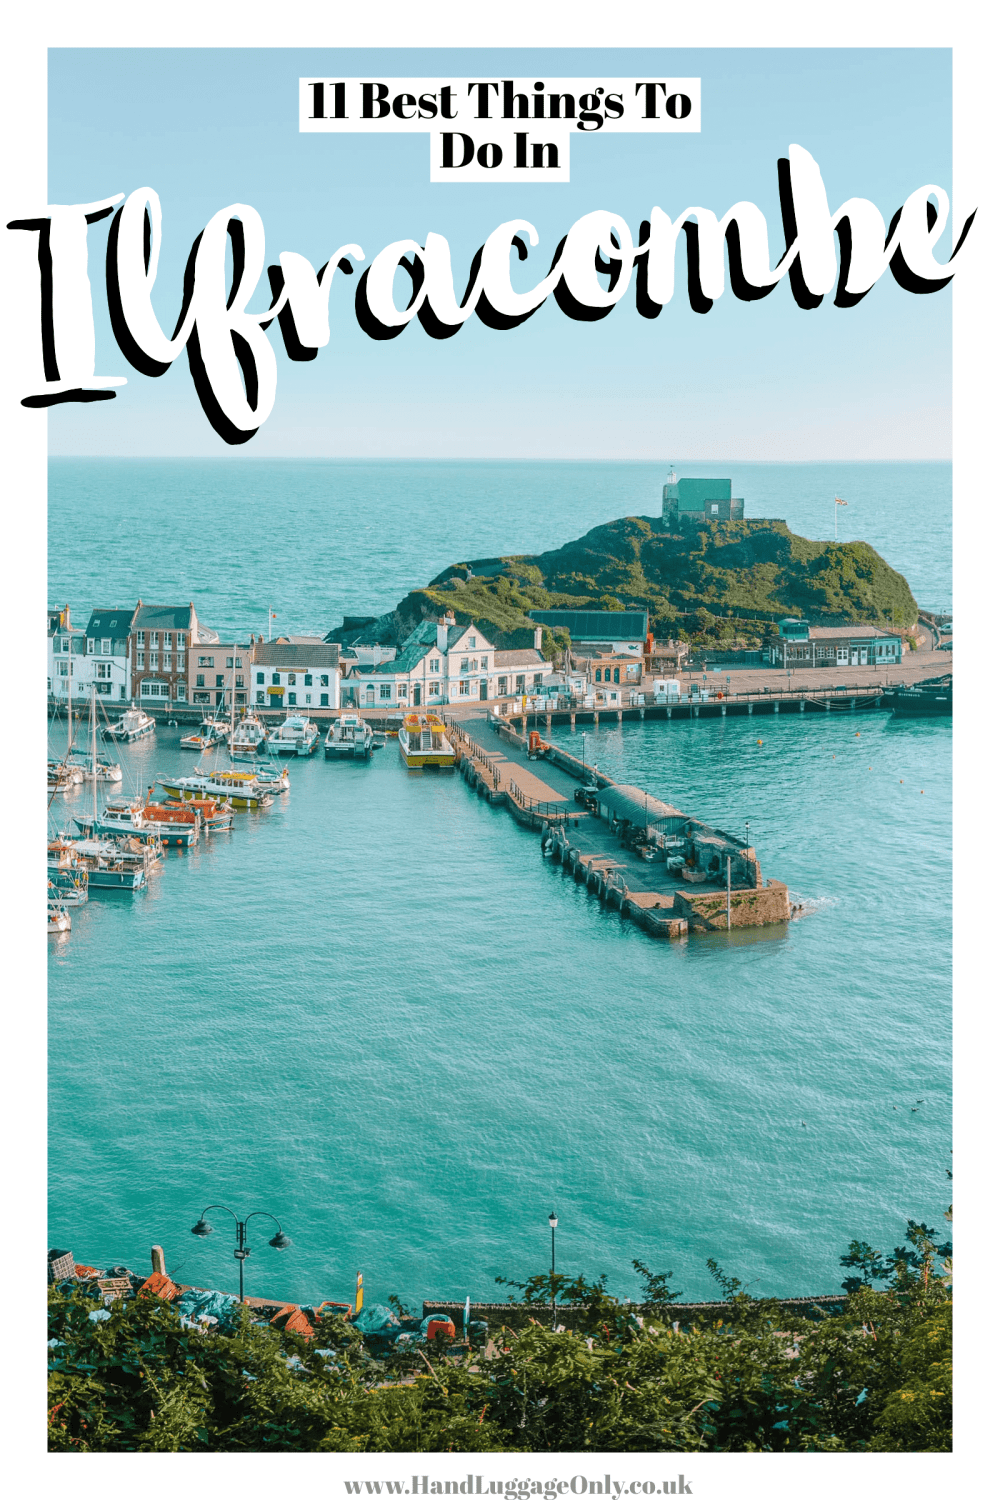 Best Things To Do In Ilfracombe (1)